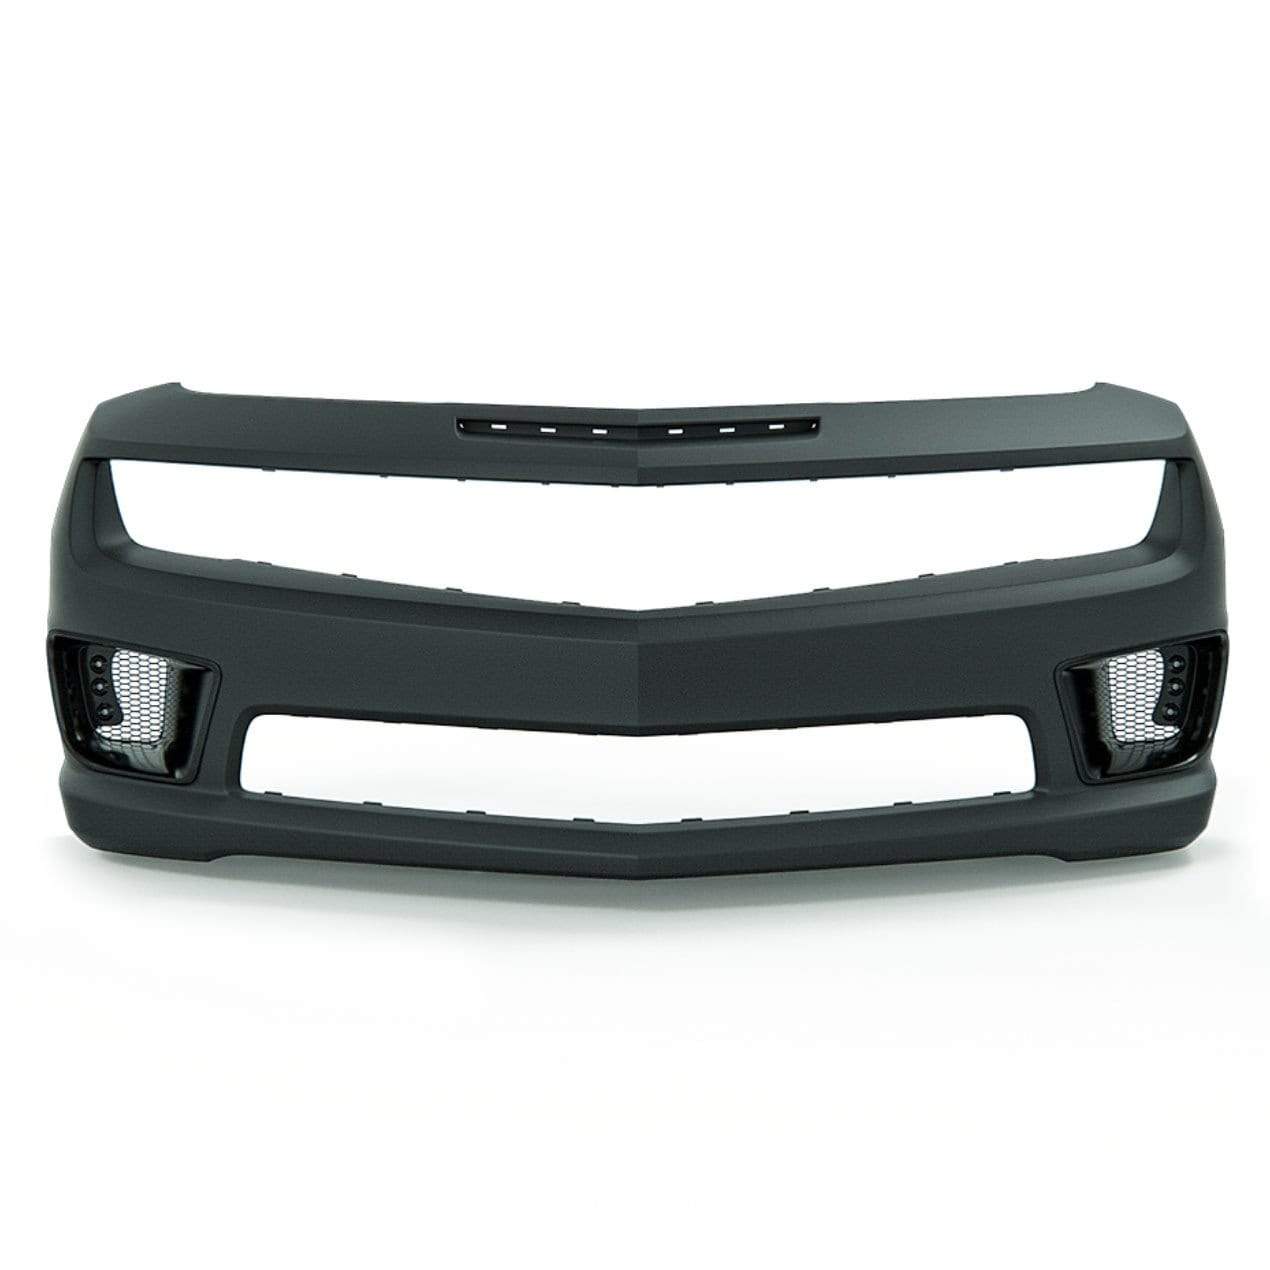 ACS Composite T3/S Bumper [33-4-042]PRM for Camaro SS, RS, LS, LT, 1LE - High-Performance Fascia with Aggressive Cooling Ports and LED Lighting Options